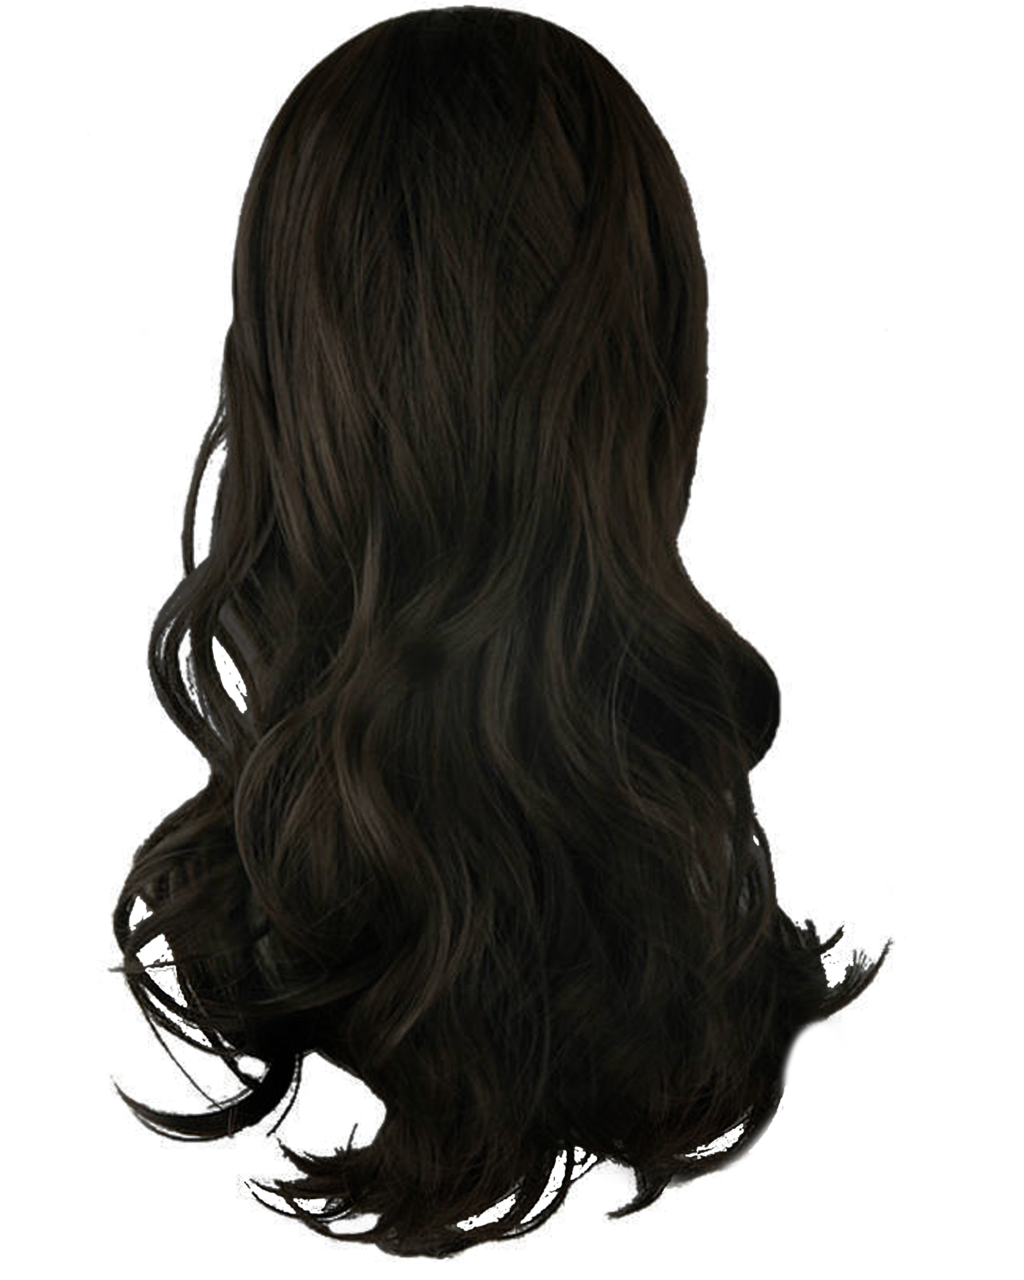 Long Hair PNG Transparent Background, Free Download #26046 - FreeIconsPNG